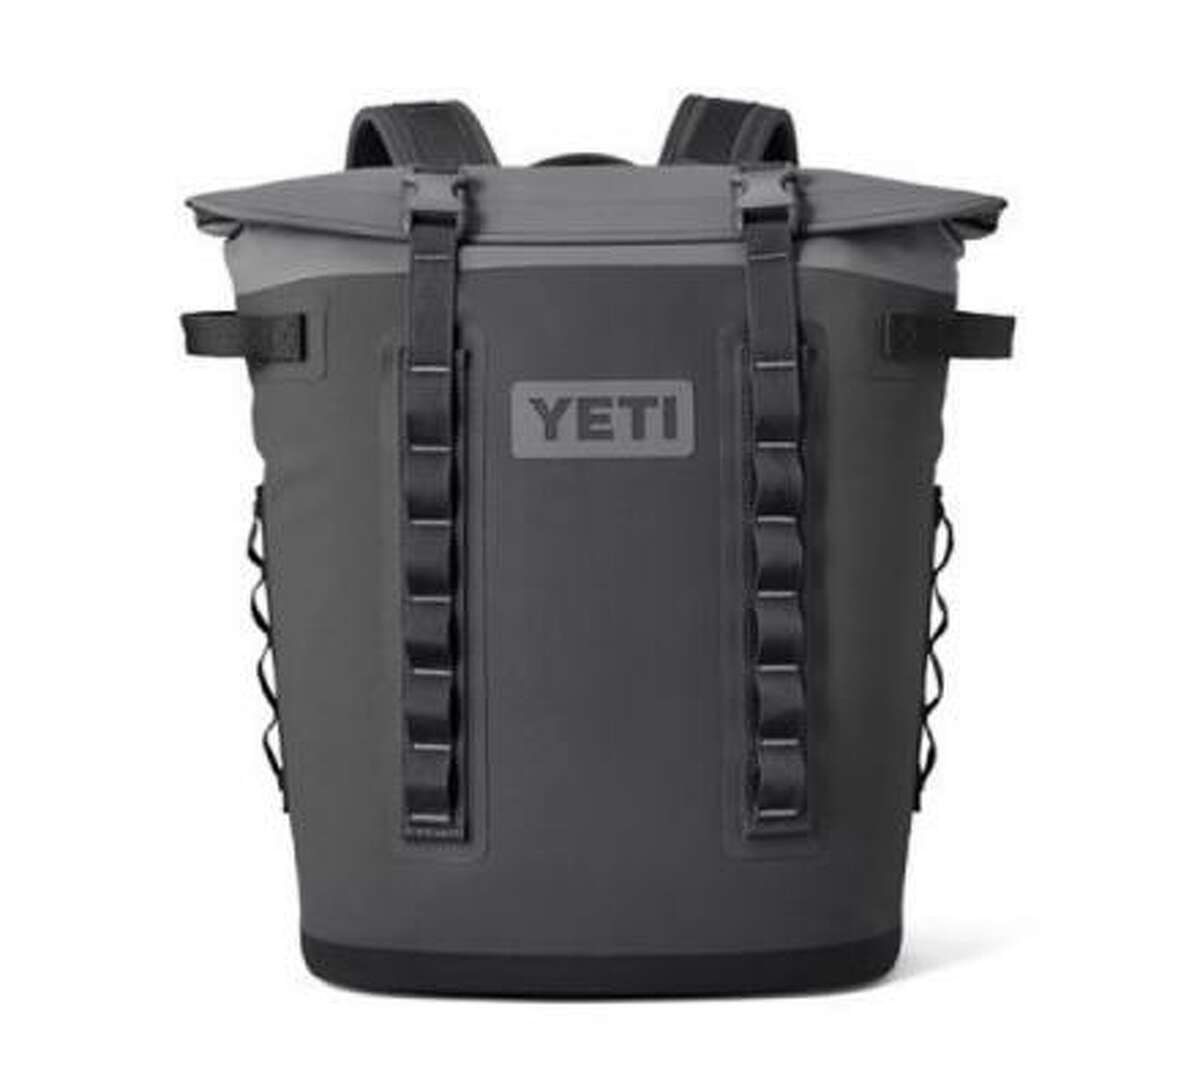 Recalled YETI Hopper M20 Soft Backpack Cooler in Charcoal color.